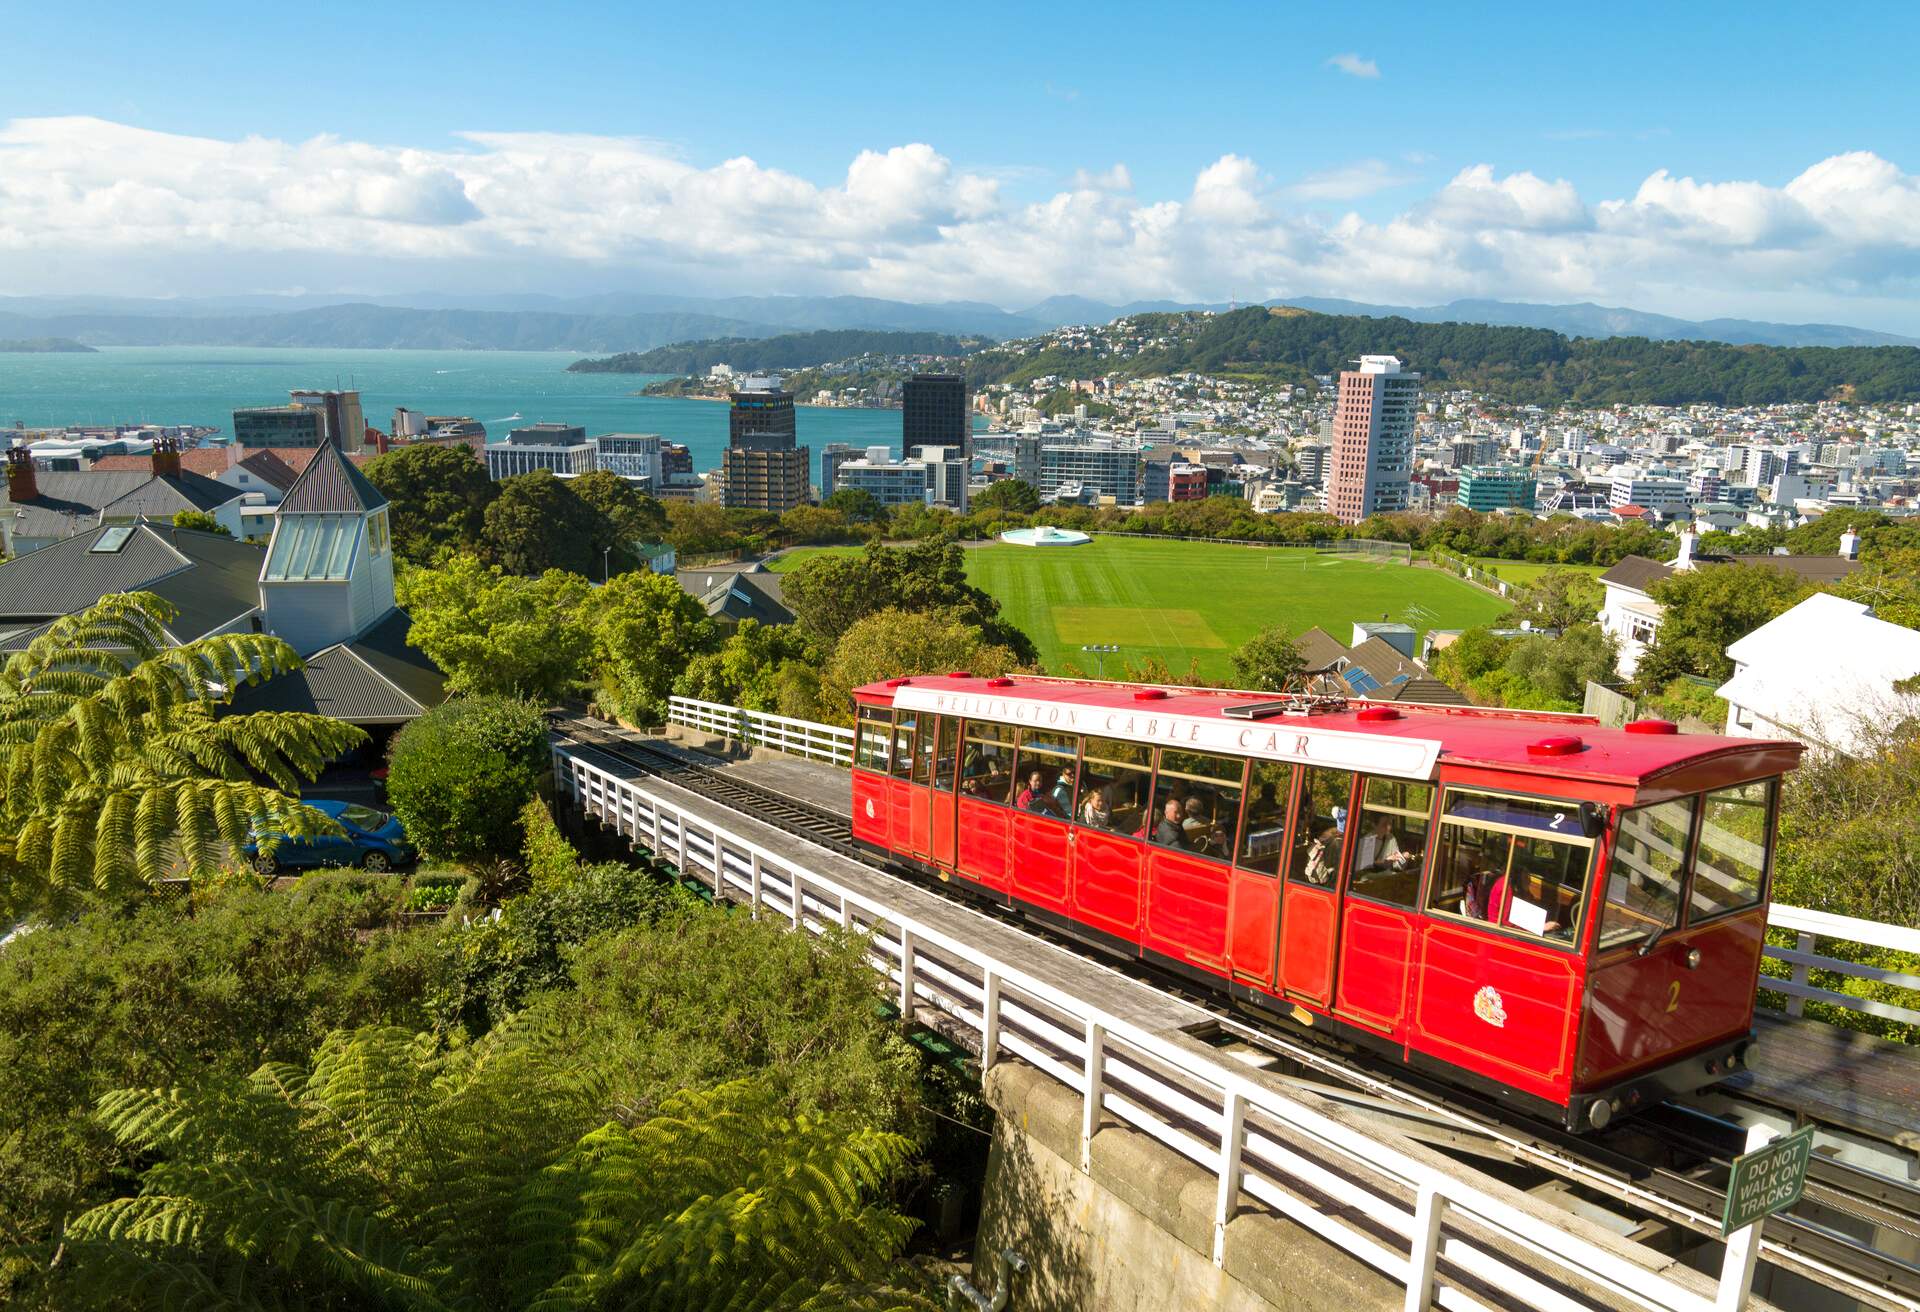 Wellington iconic cable car, high angle view over the city, New Zealand